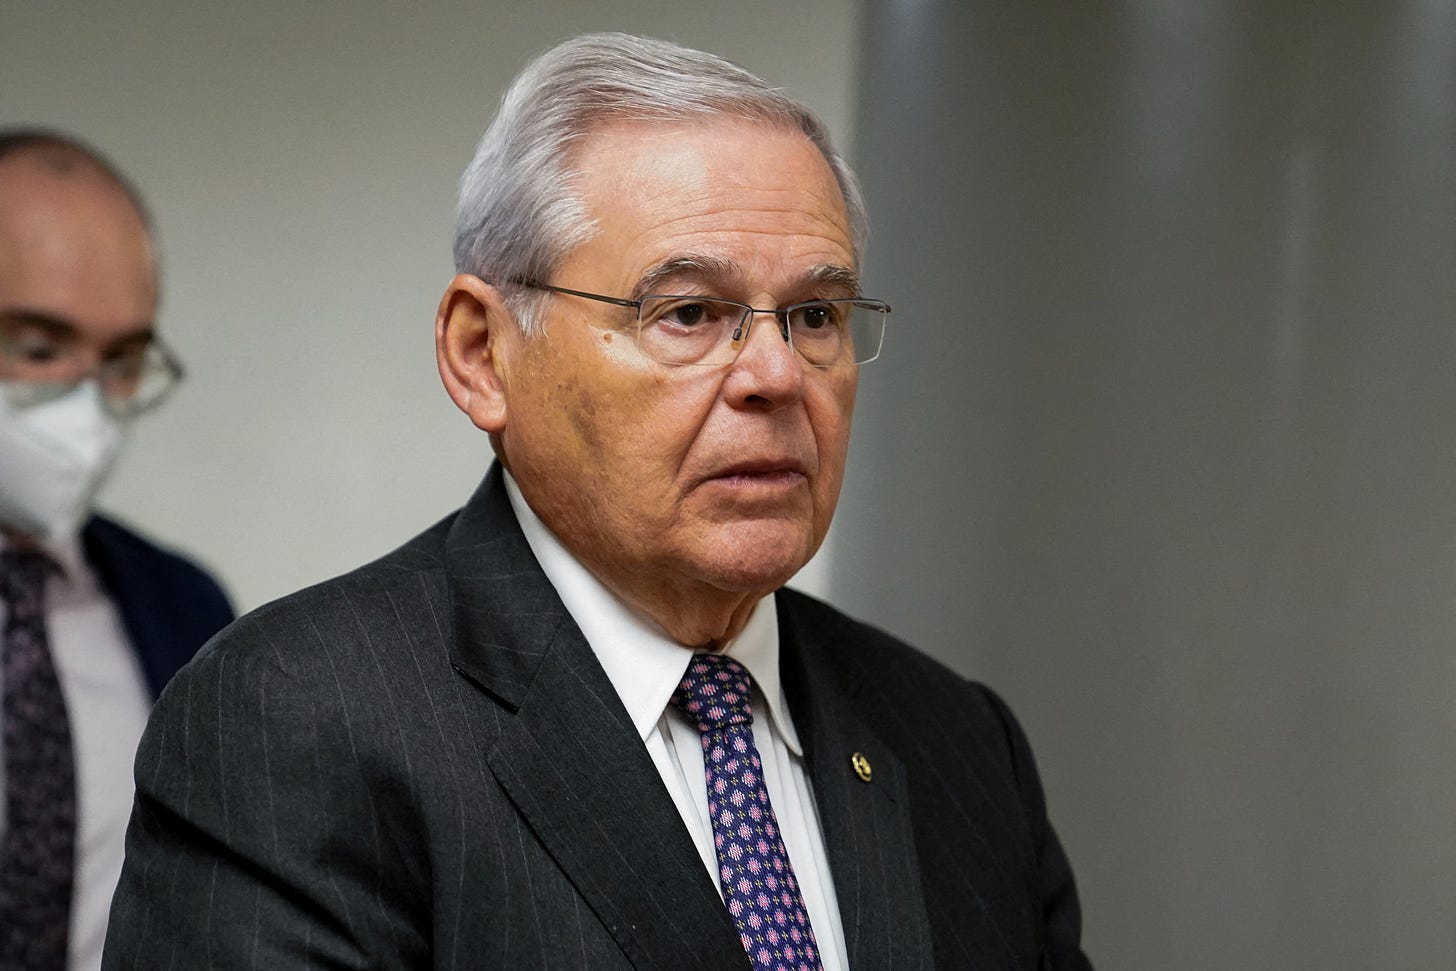 Menendez charges cost Biden key foreign policy ally | Reuters